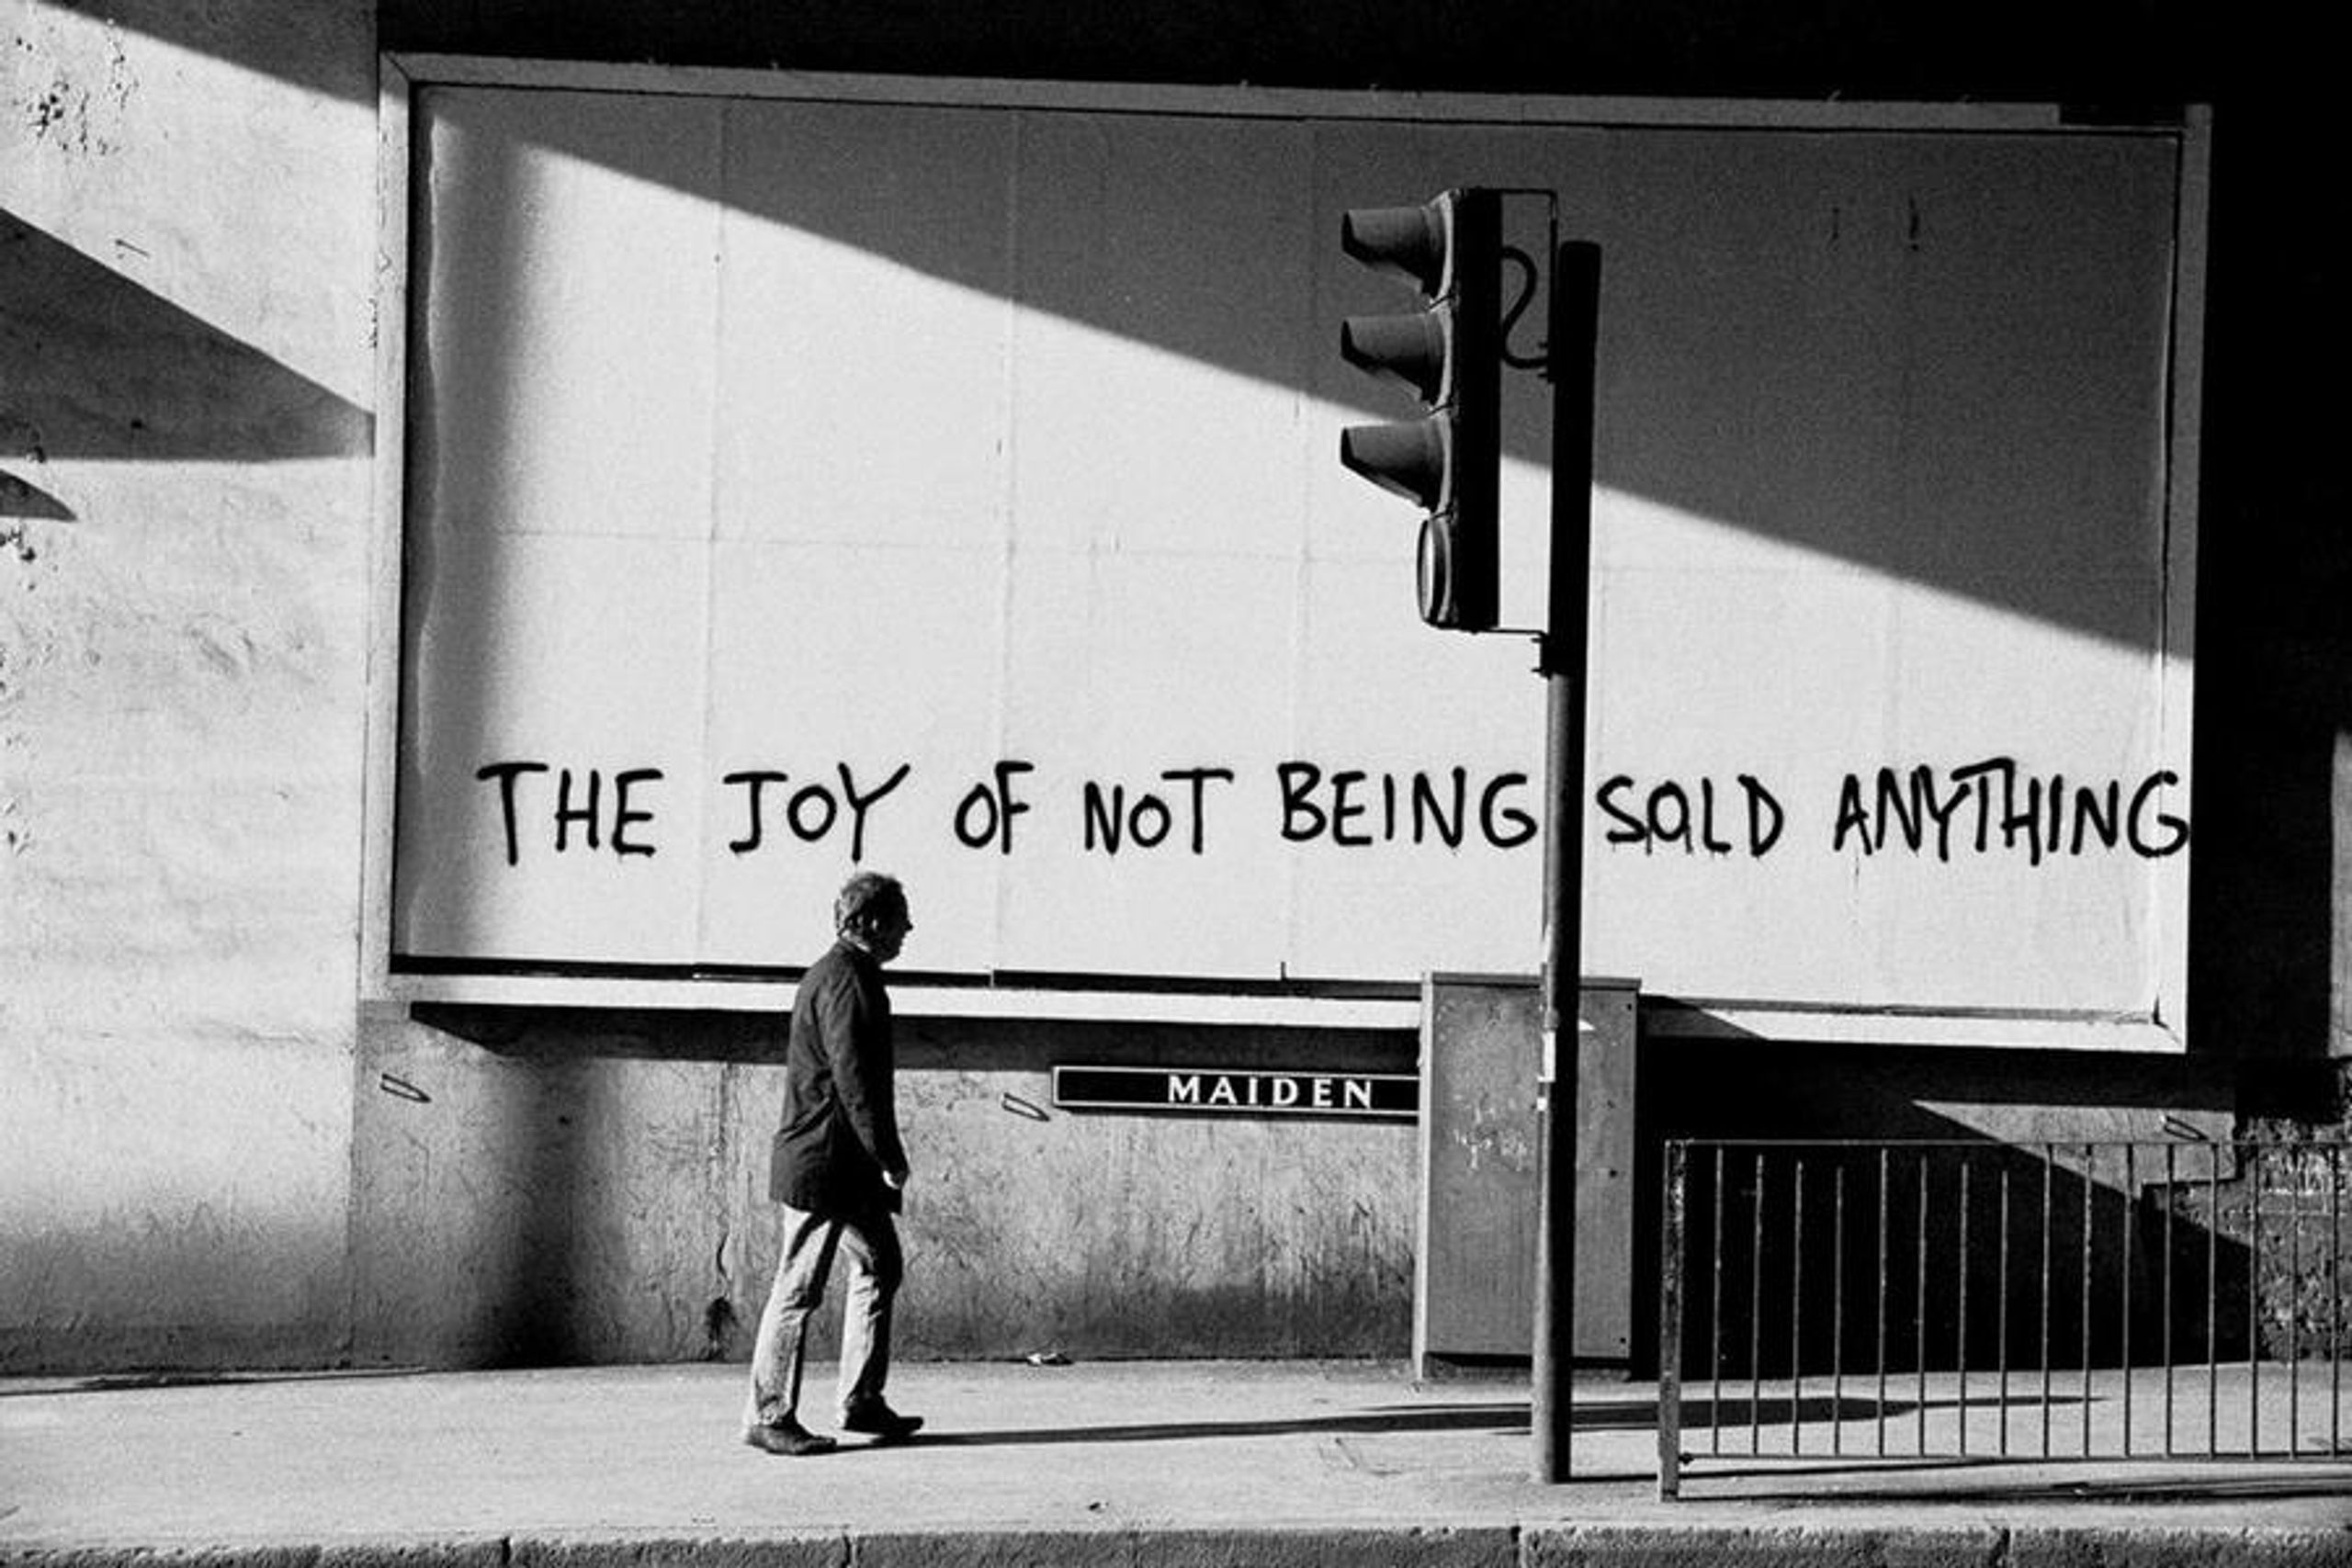 A person walking along a footpath. Spray painted onto the wall beside them: "THE JOY OF NOT BEING SOLD ANYTHING".